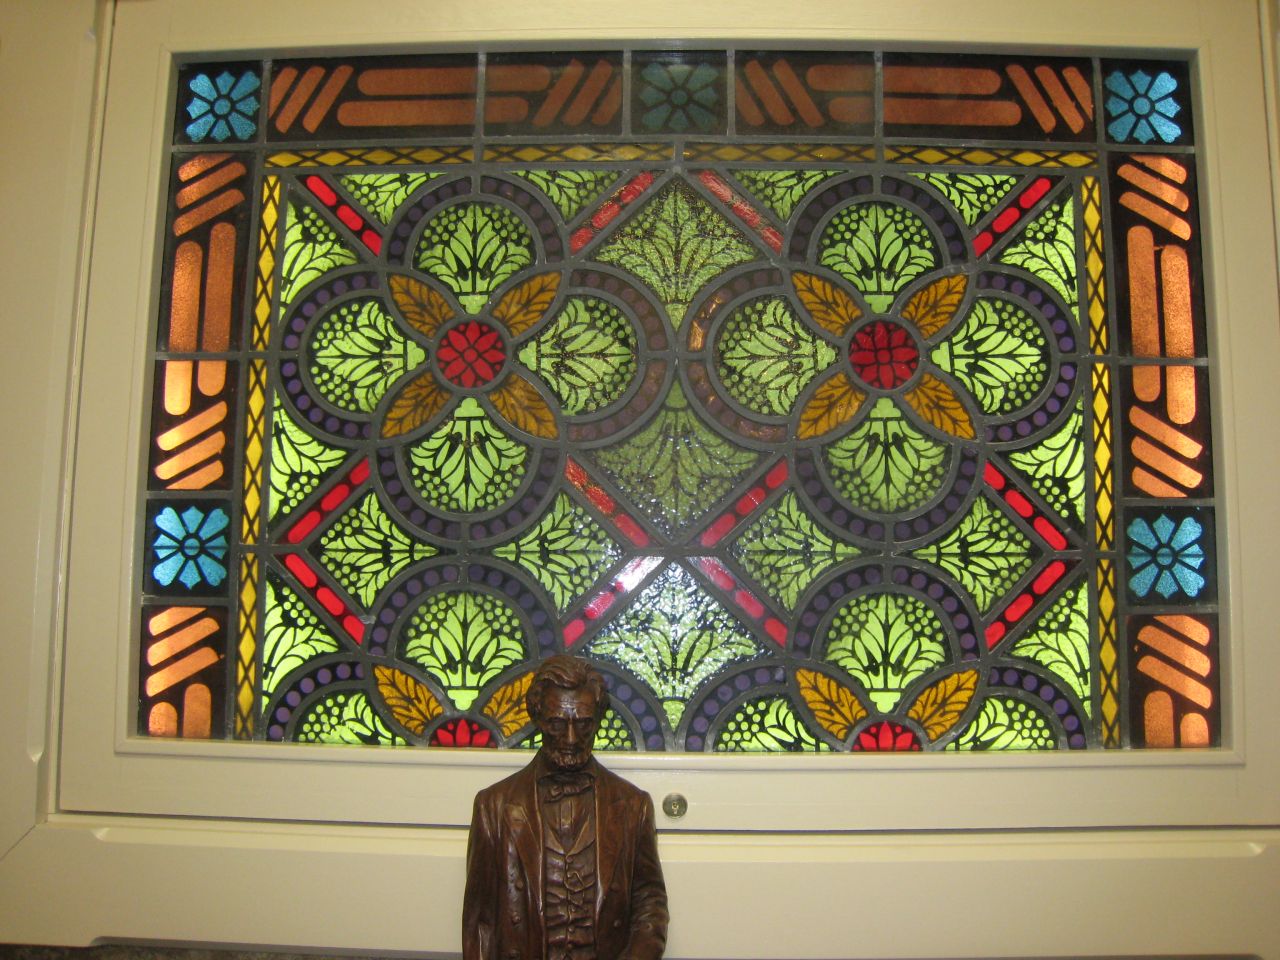 A statue of Abraham Lincoln stands in front of a stained glass window.